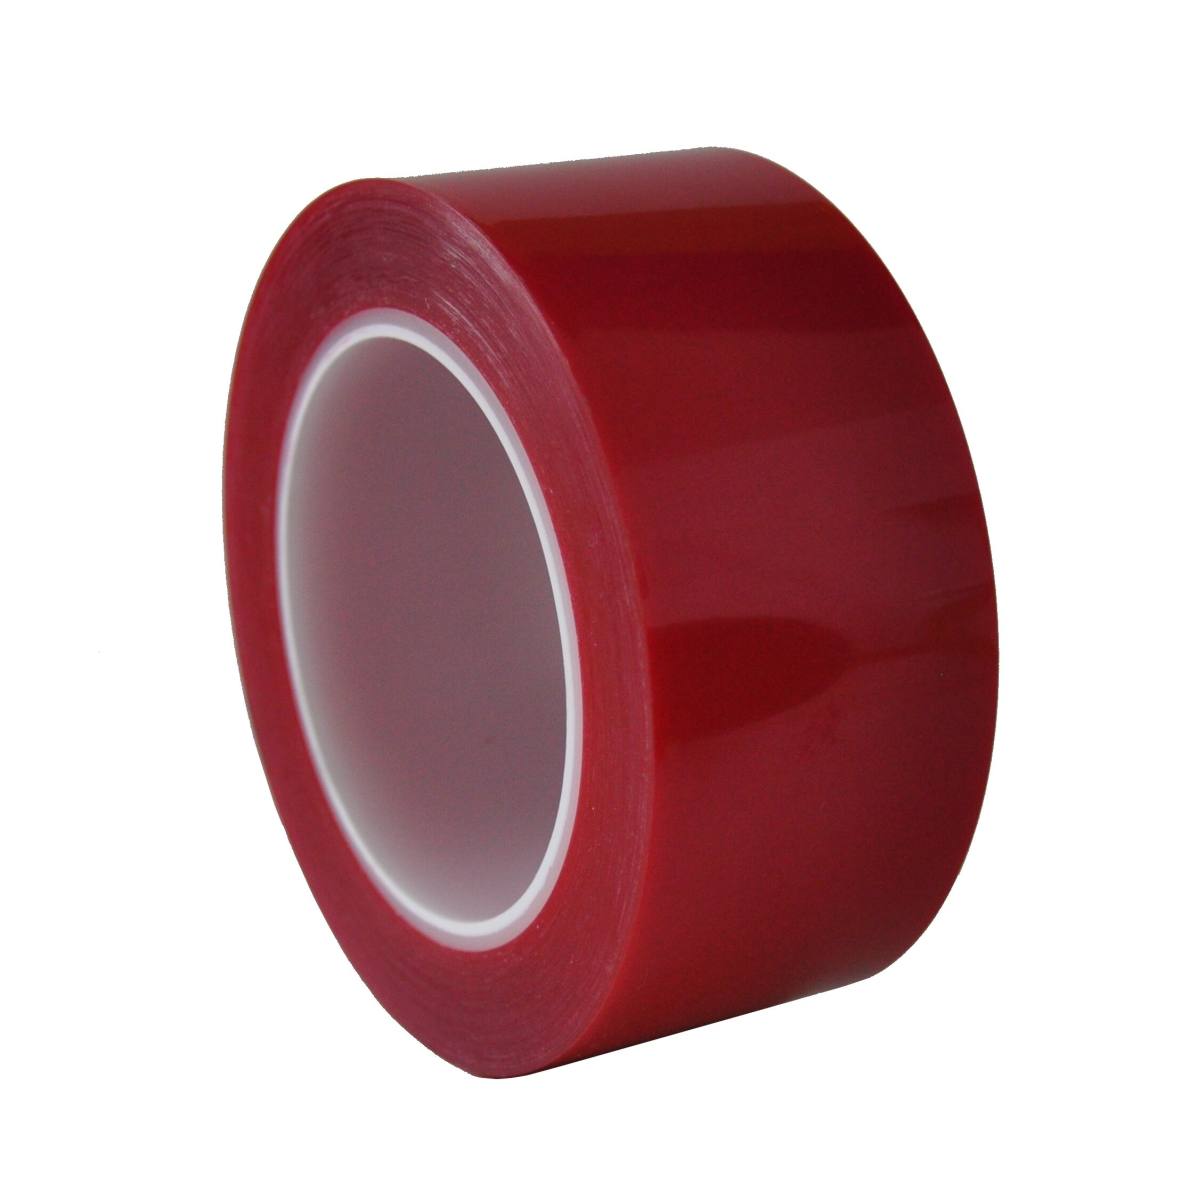 S-K-S 208R polyester adhesive tape, 15mmx66m, red